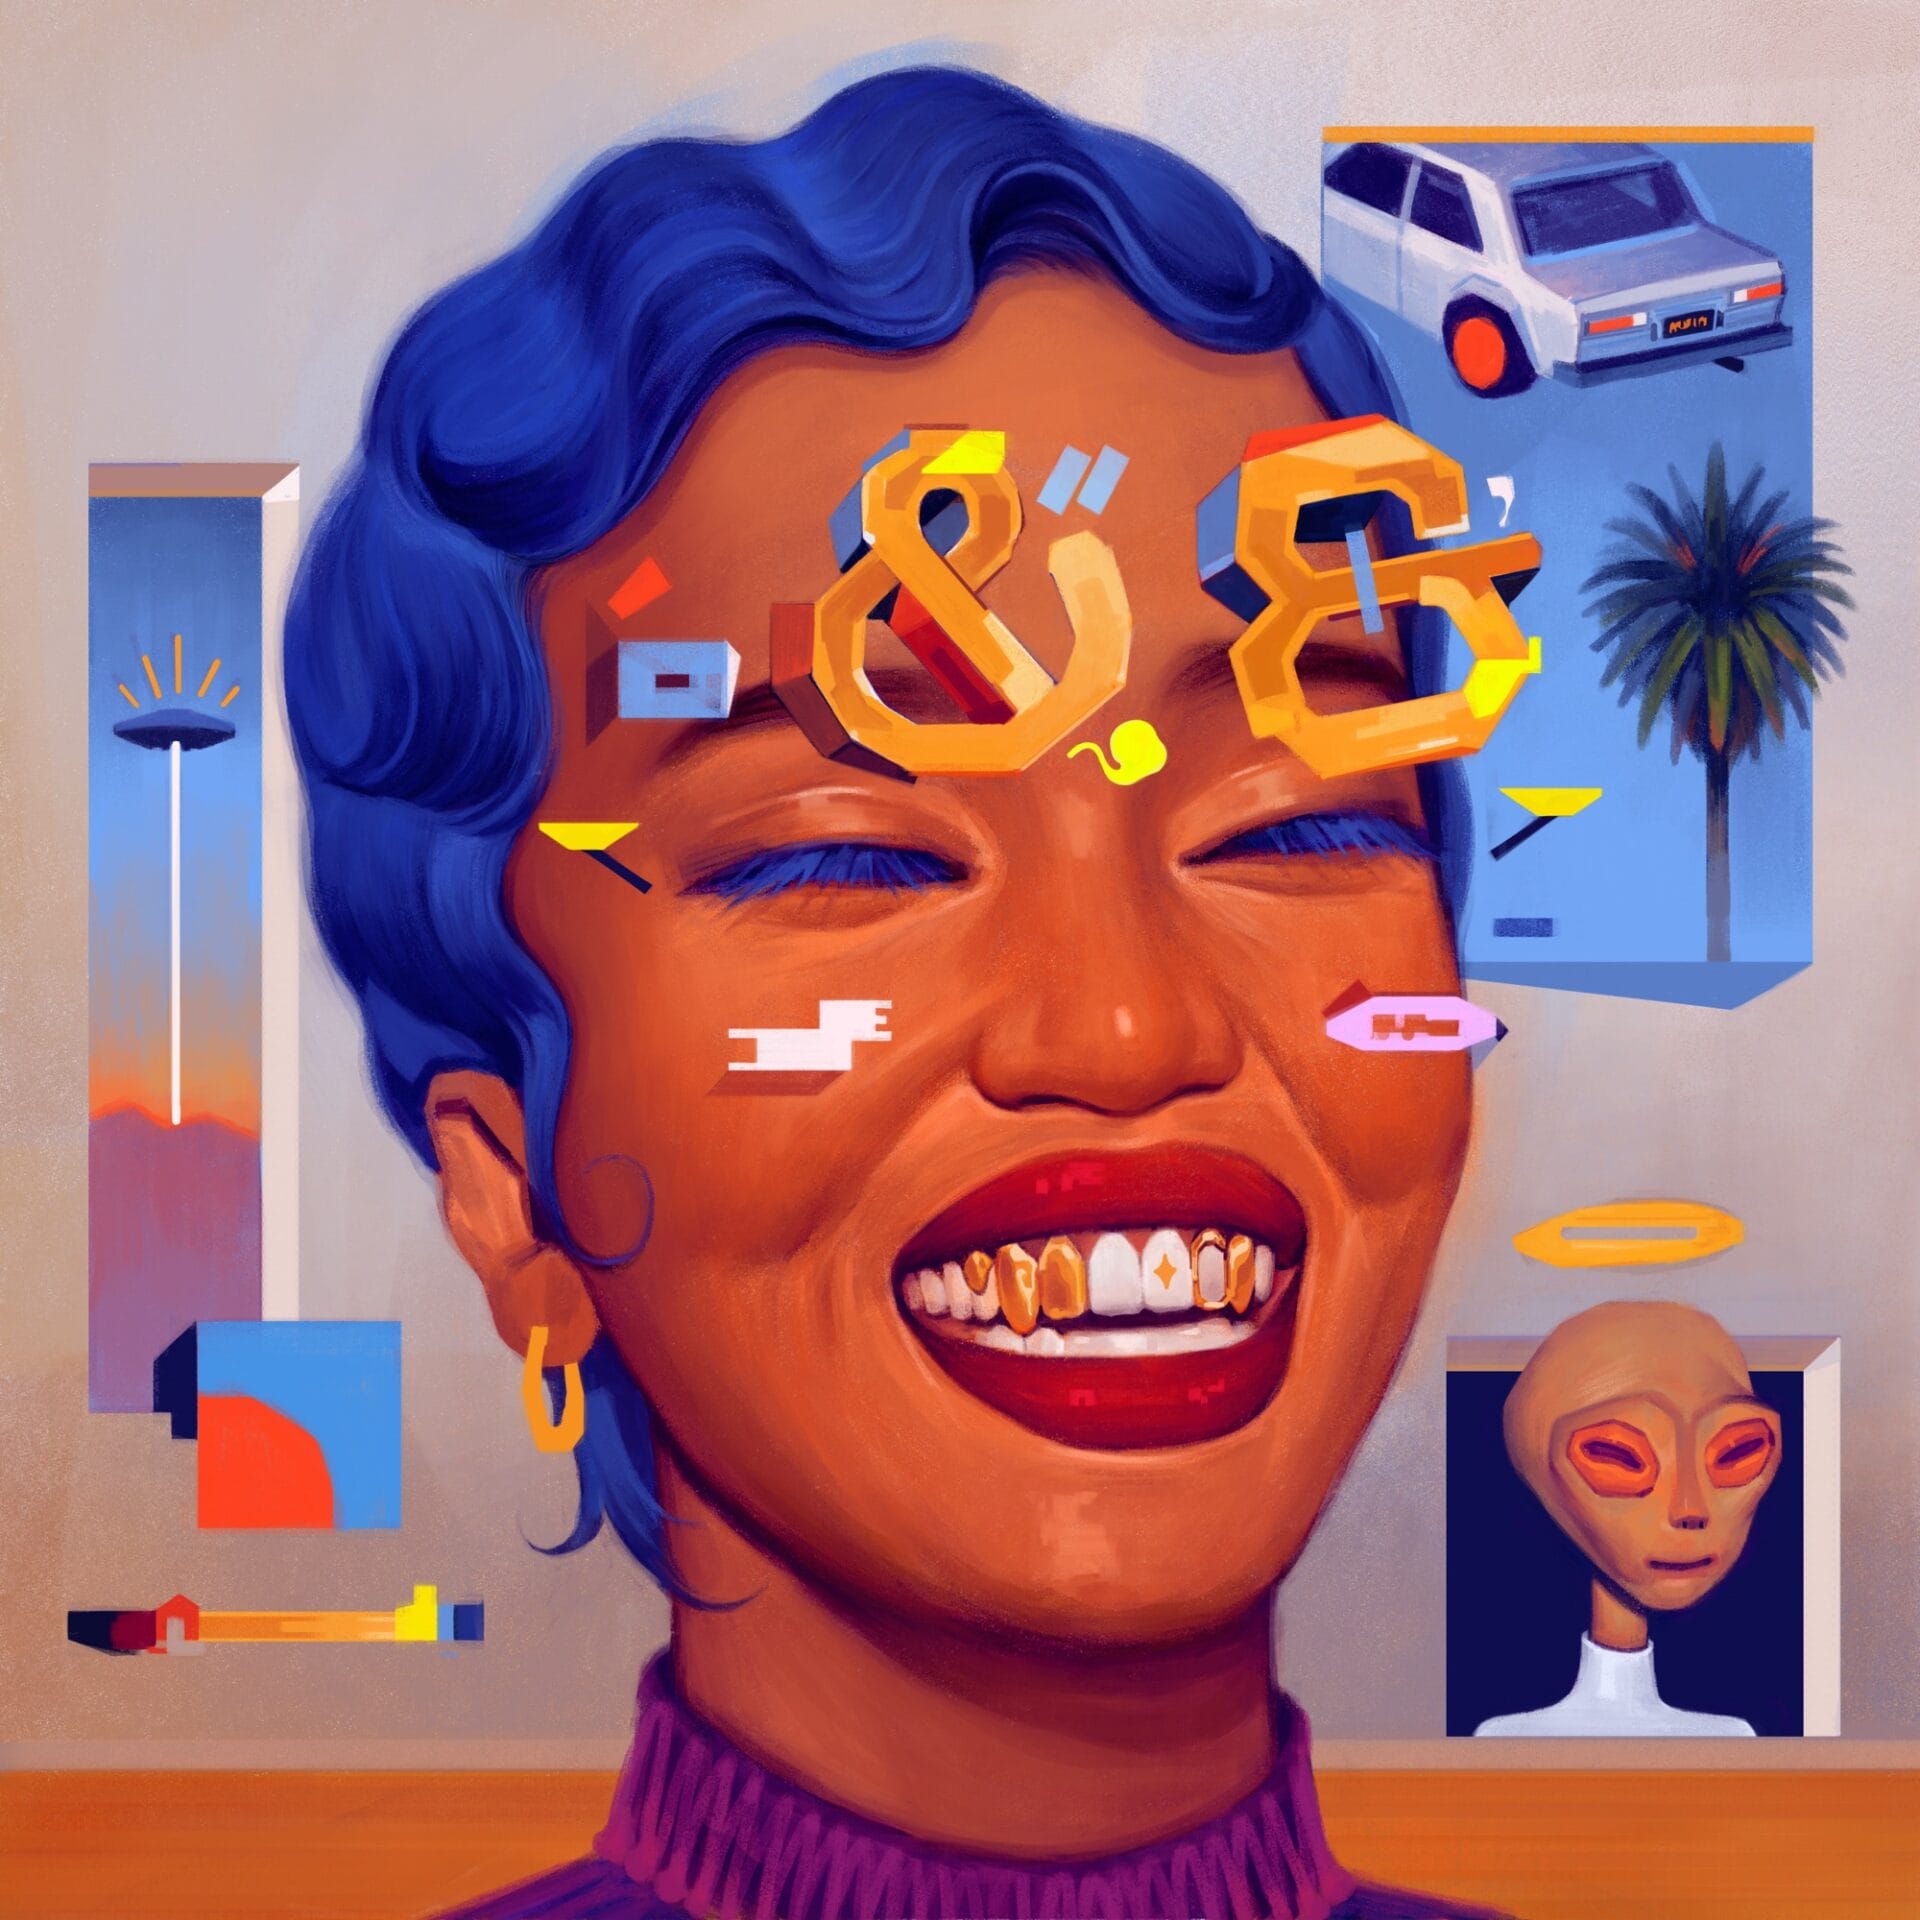 a portrait of a woman white short blue hair and gold teeth smiling with ampersands, cars, trees and aliens surrounding her